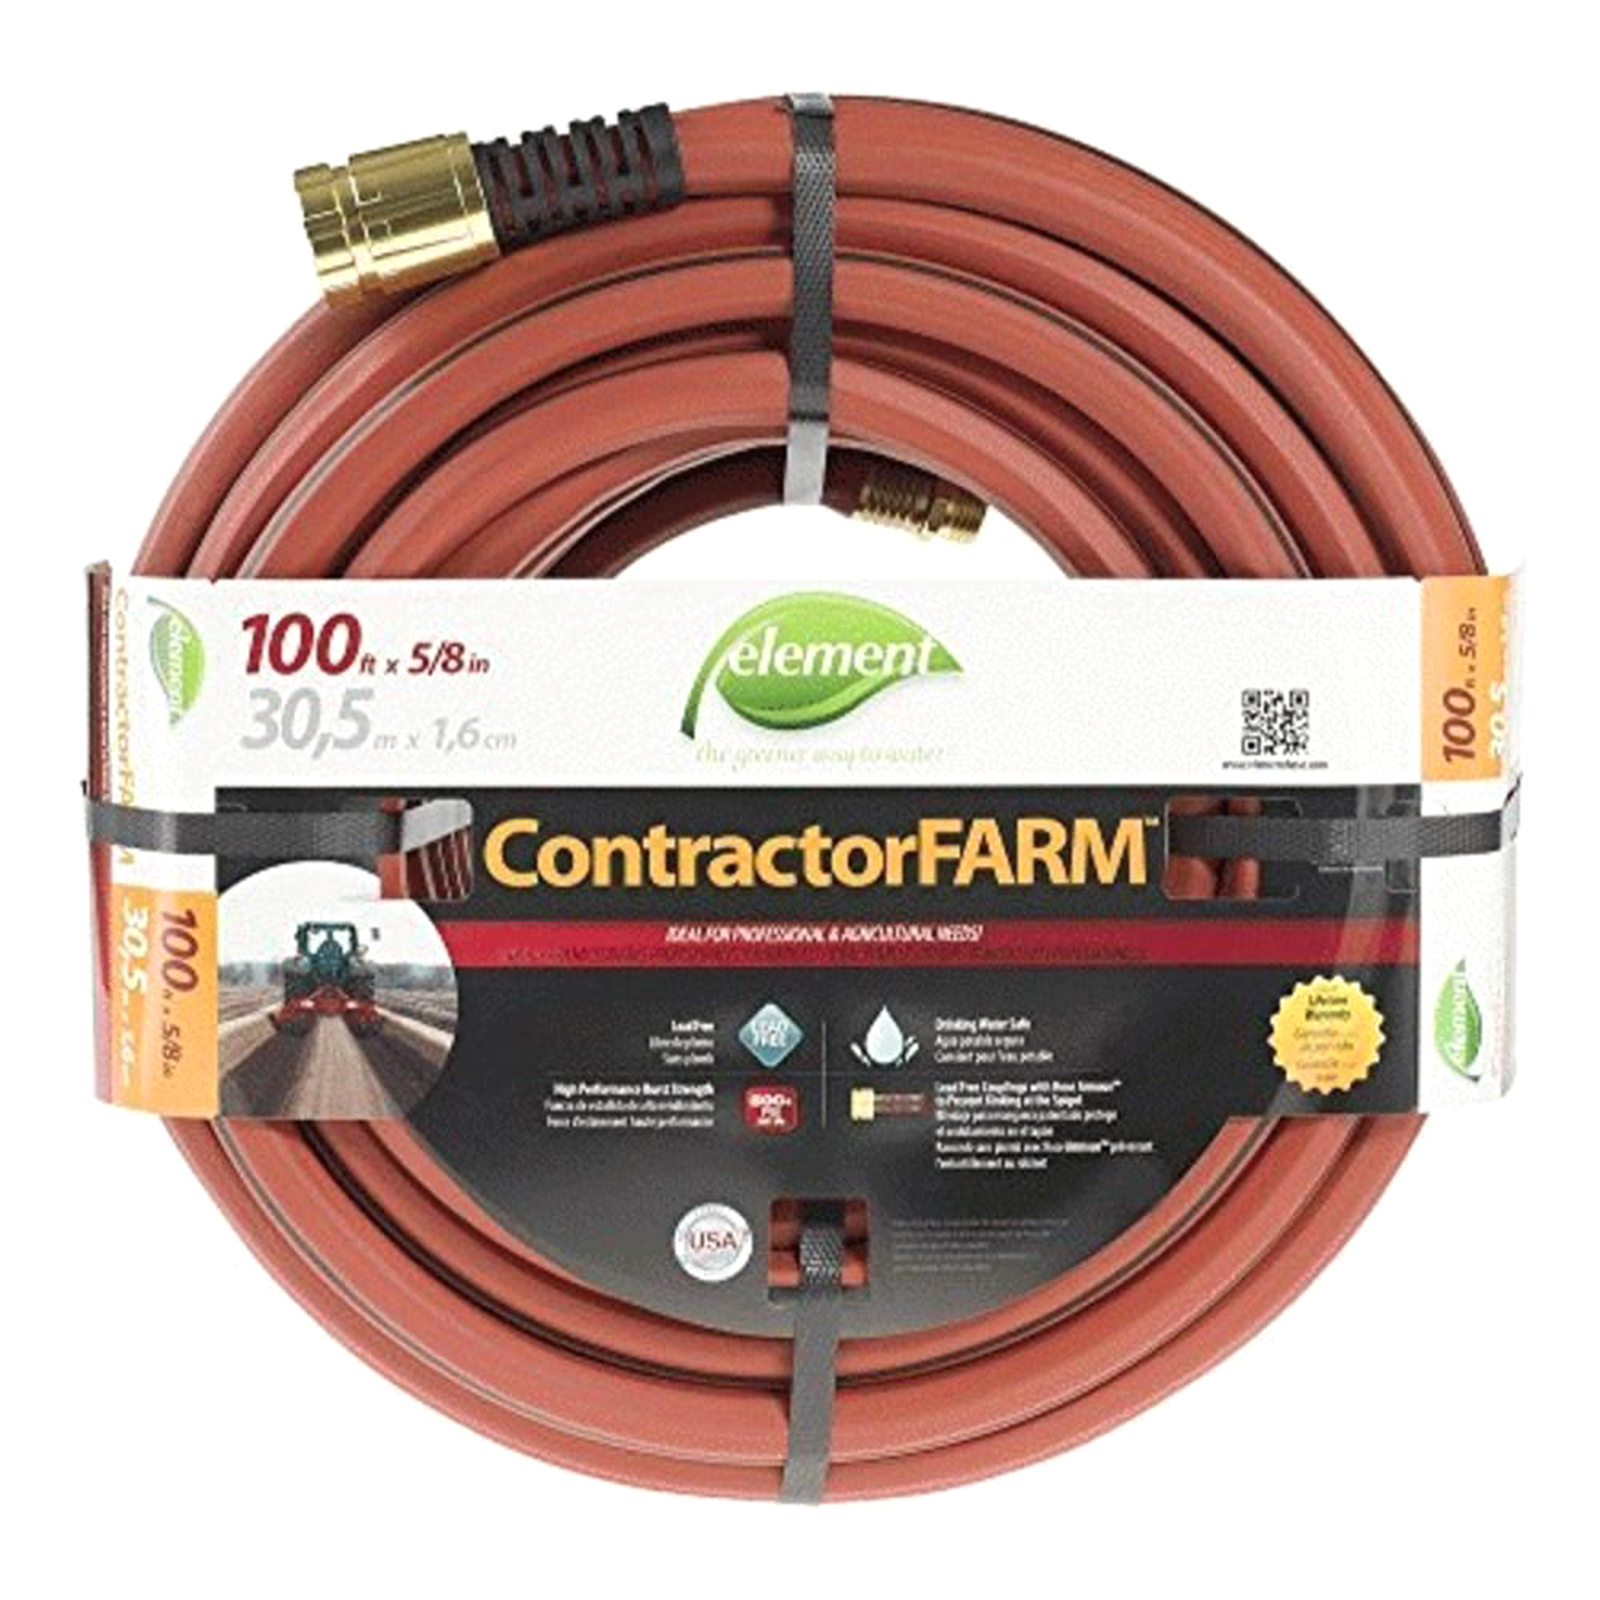 Element SID790RLKG Contractor 100' Farm Hose with 5/8"Dia